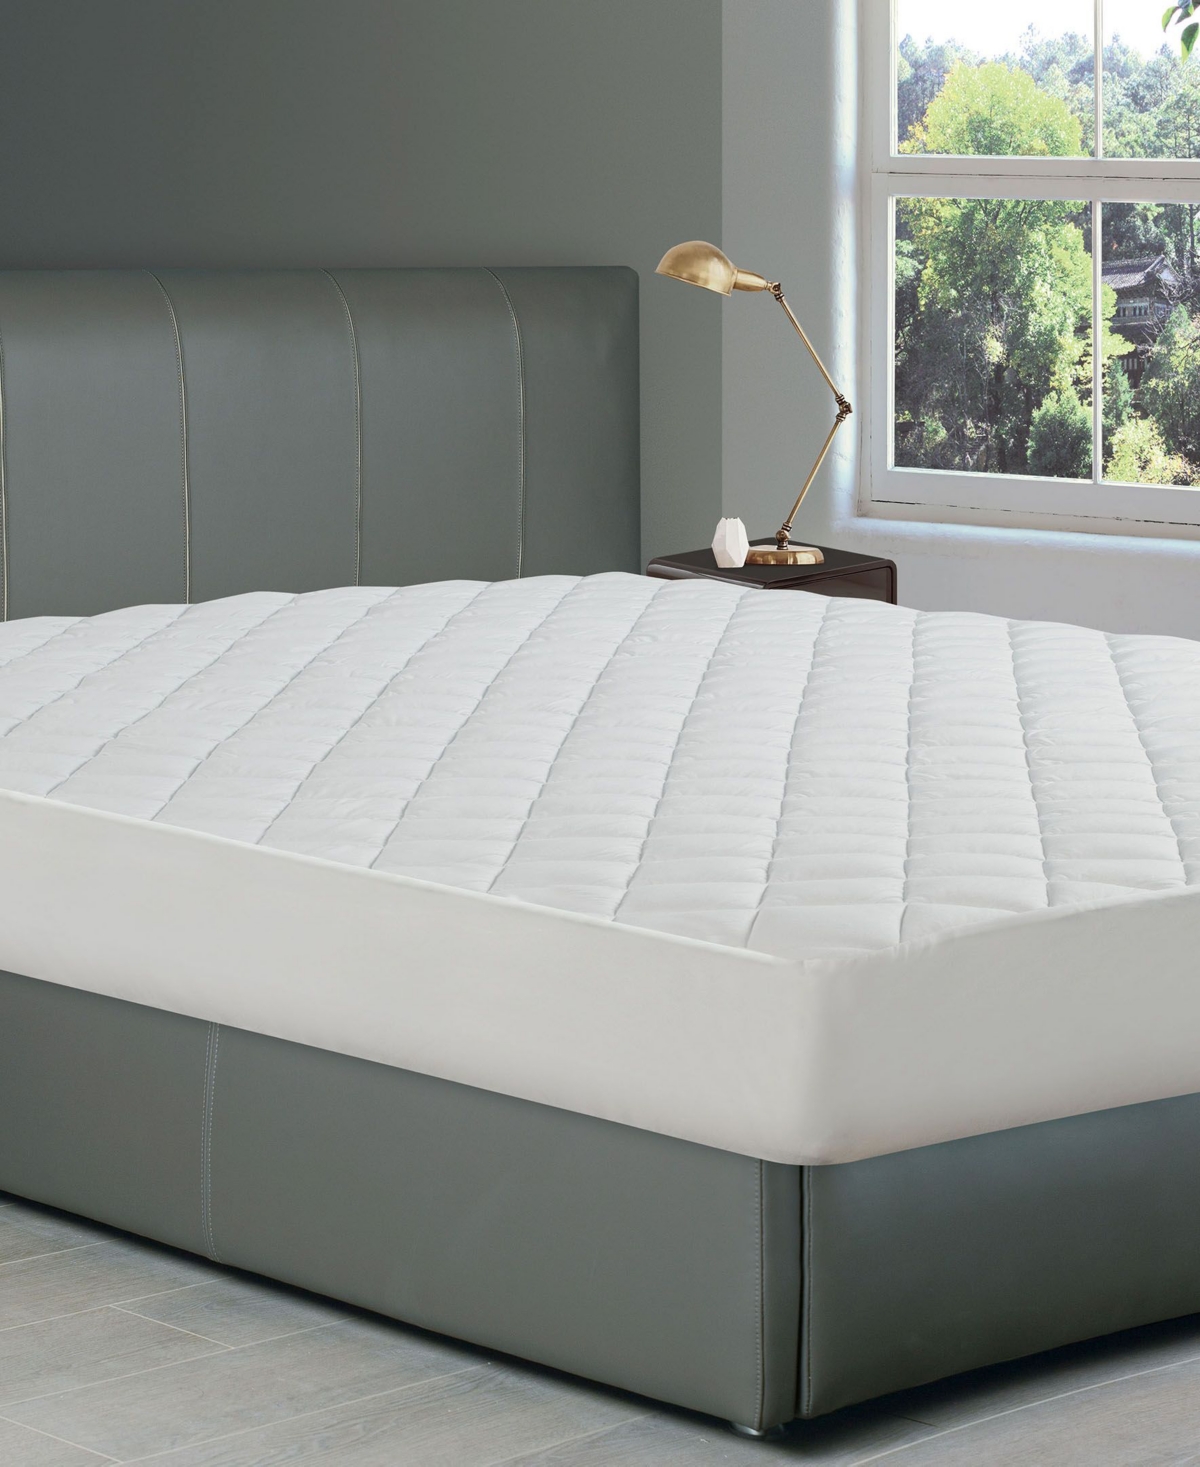 All-In-One Ultra Fresh Odor Control Fitted Mattress Pad, King